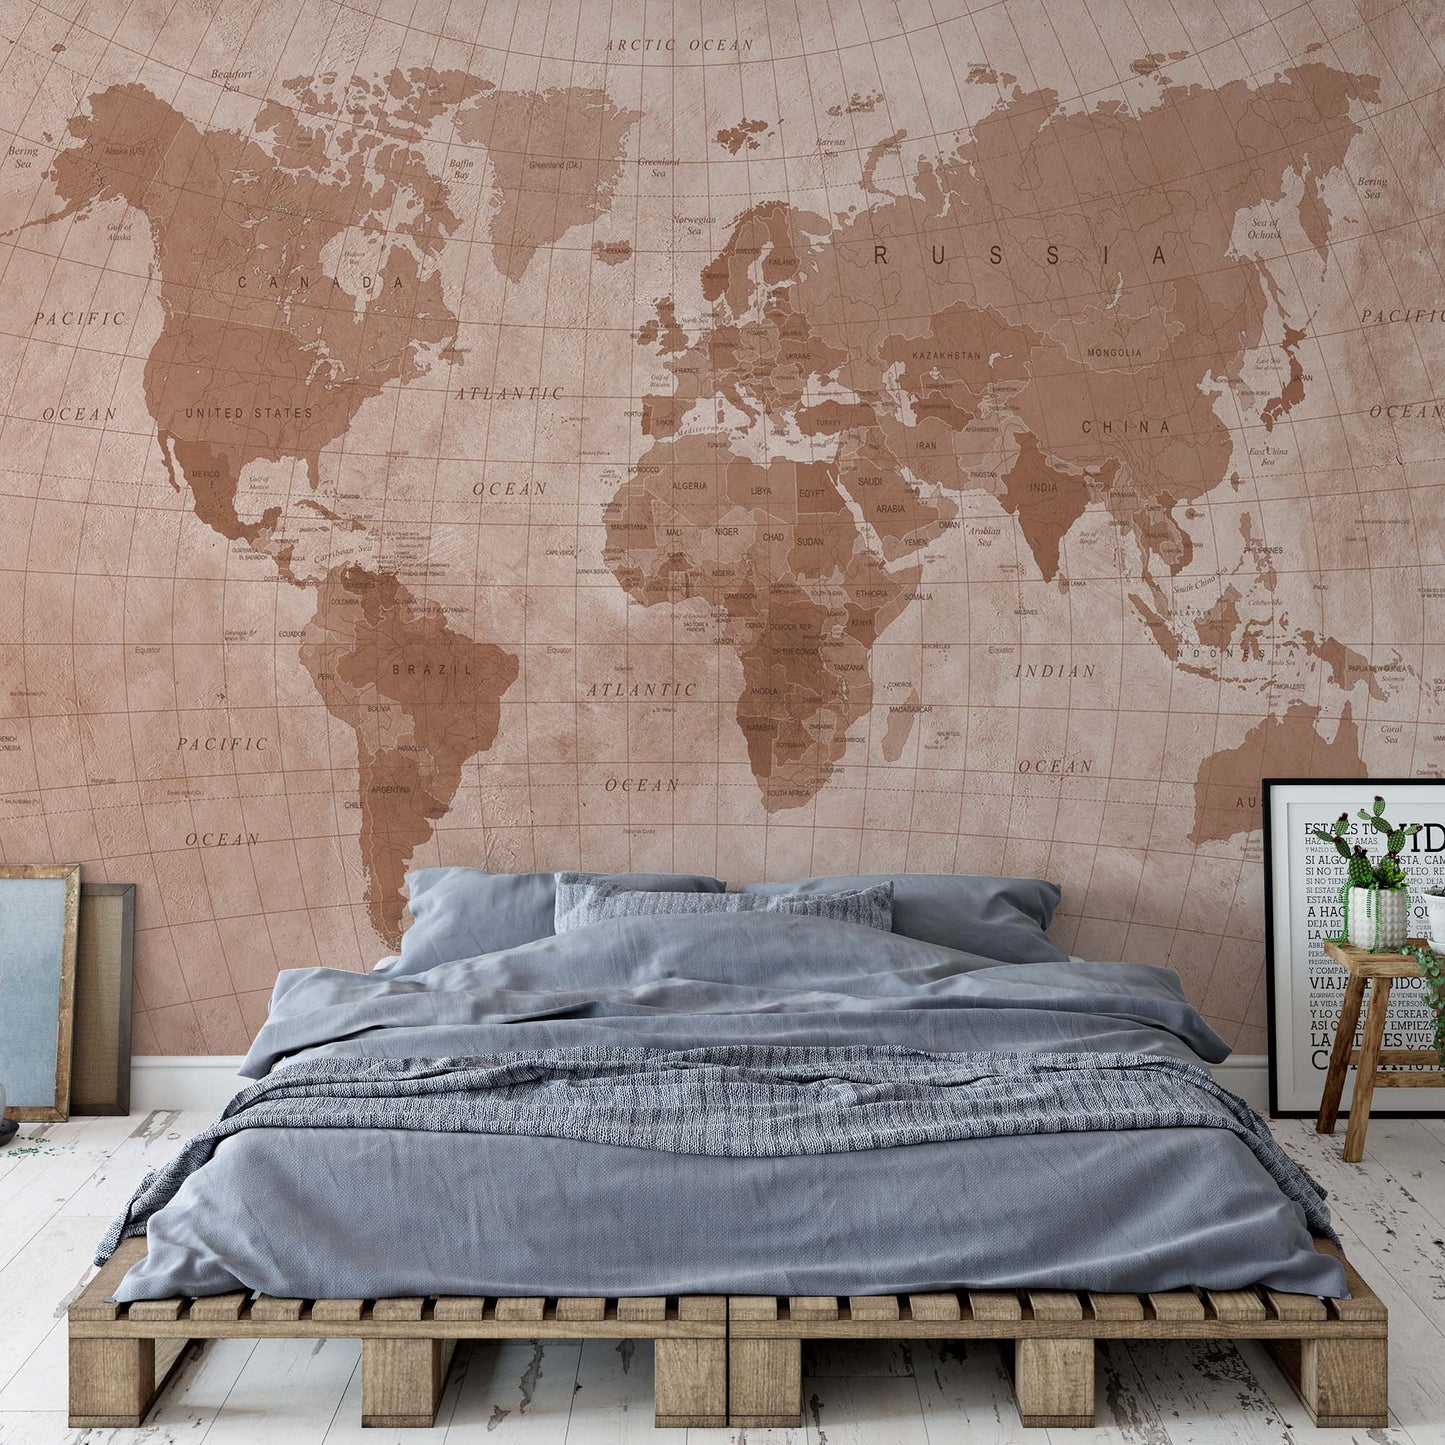 World Map Textured Sepia Wallpaper Waterproof for Rooms Bathroom Kitchen - USTAD HOME